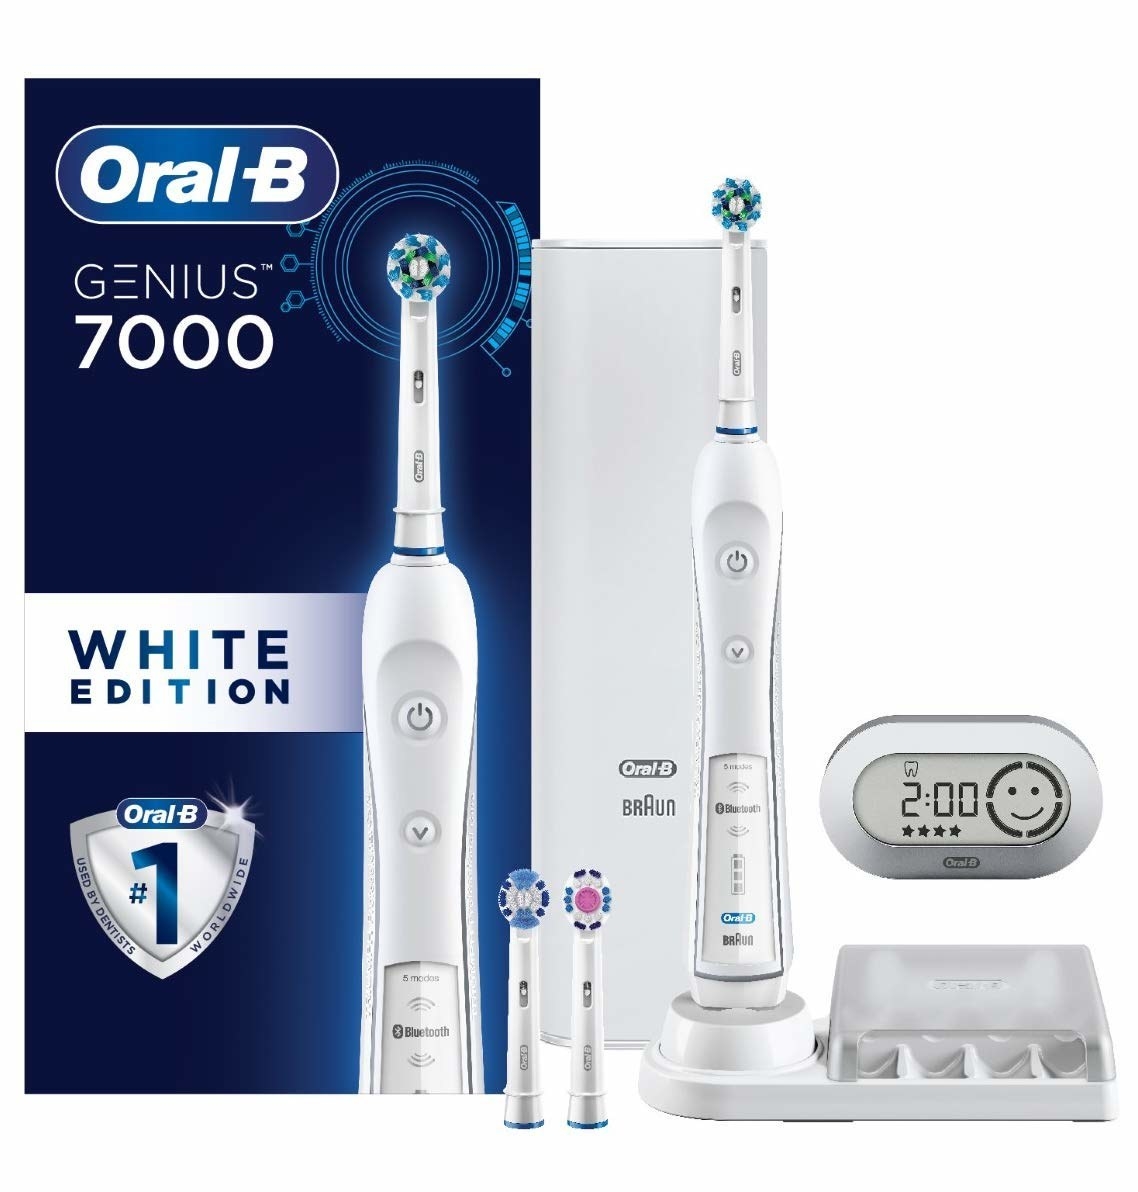 Oral B Genius 7000 toothbrush with various accessories